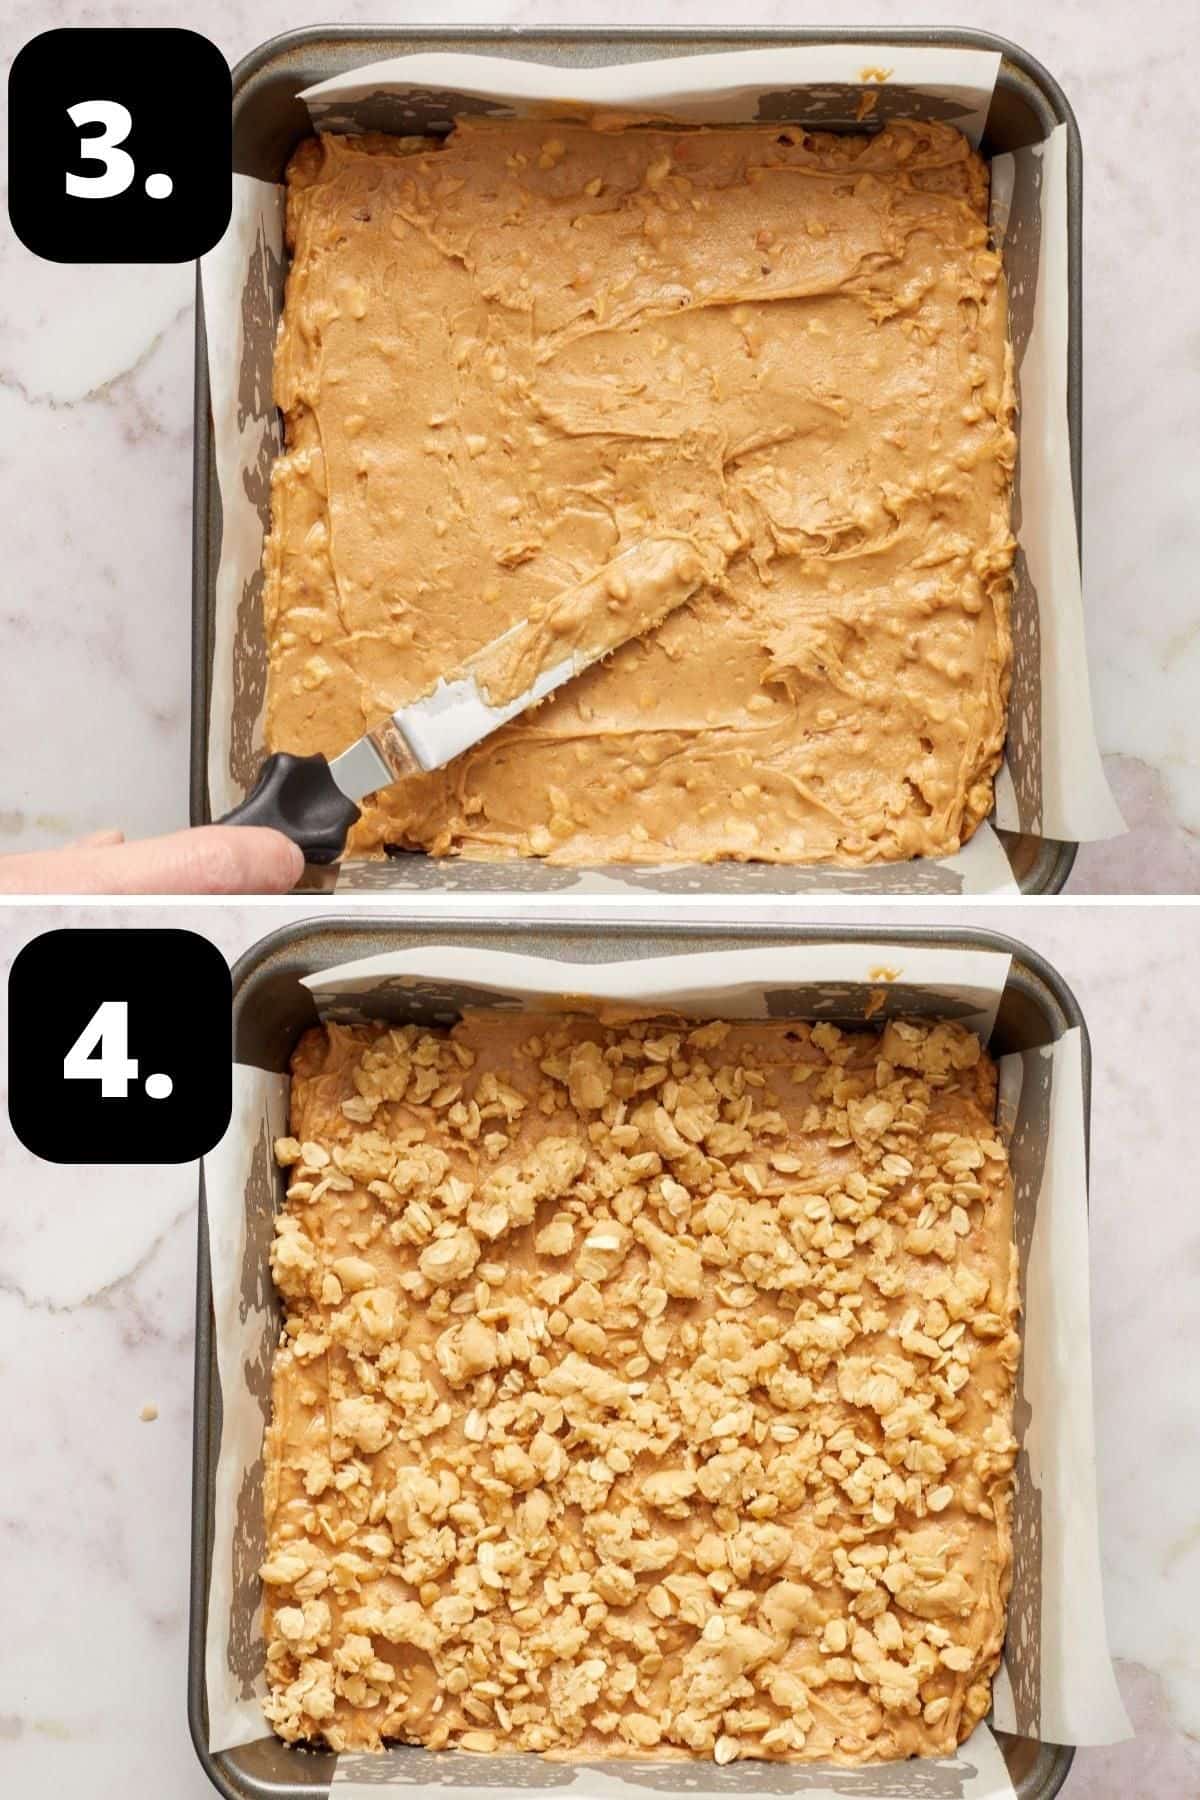 Steps 3-4 of preparing this recipe - topping the base with Peanut Butter mixture and adding the remaining crumble to the top.